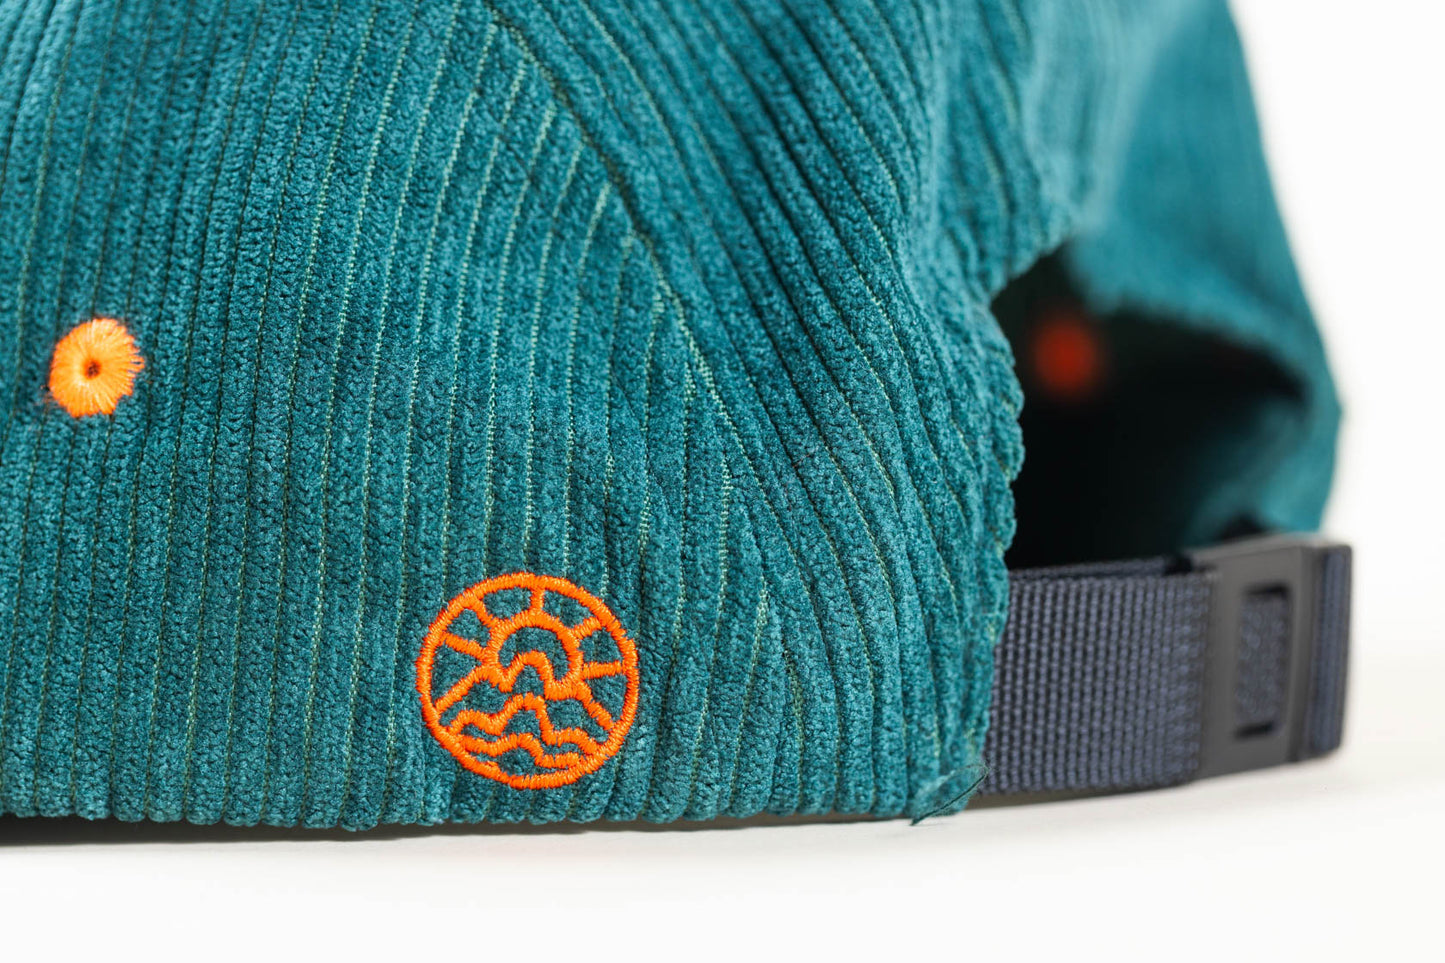 Back view of a McClumsy 5-Panel green corduroy hat and nylon strap